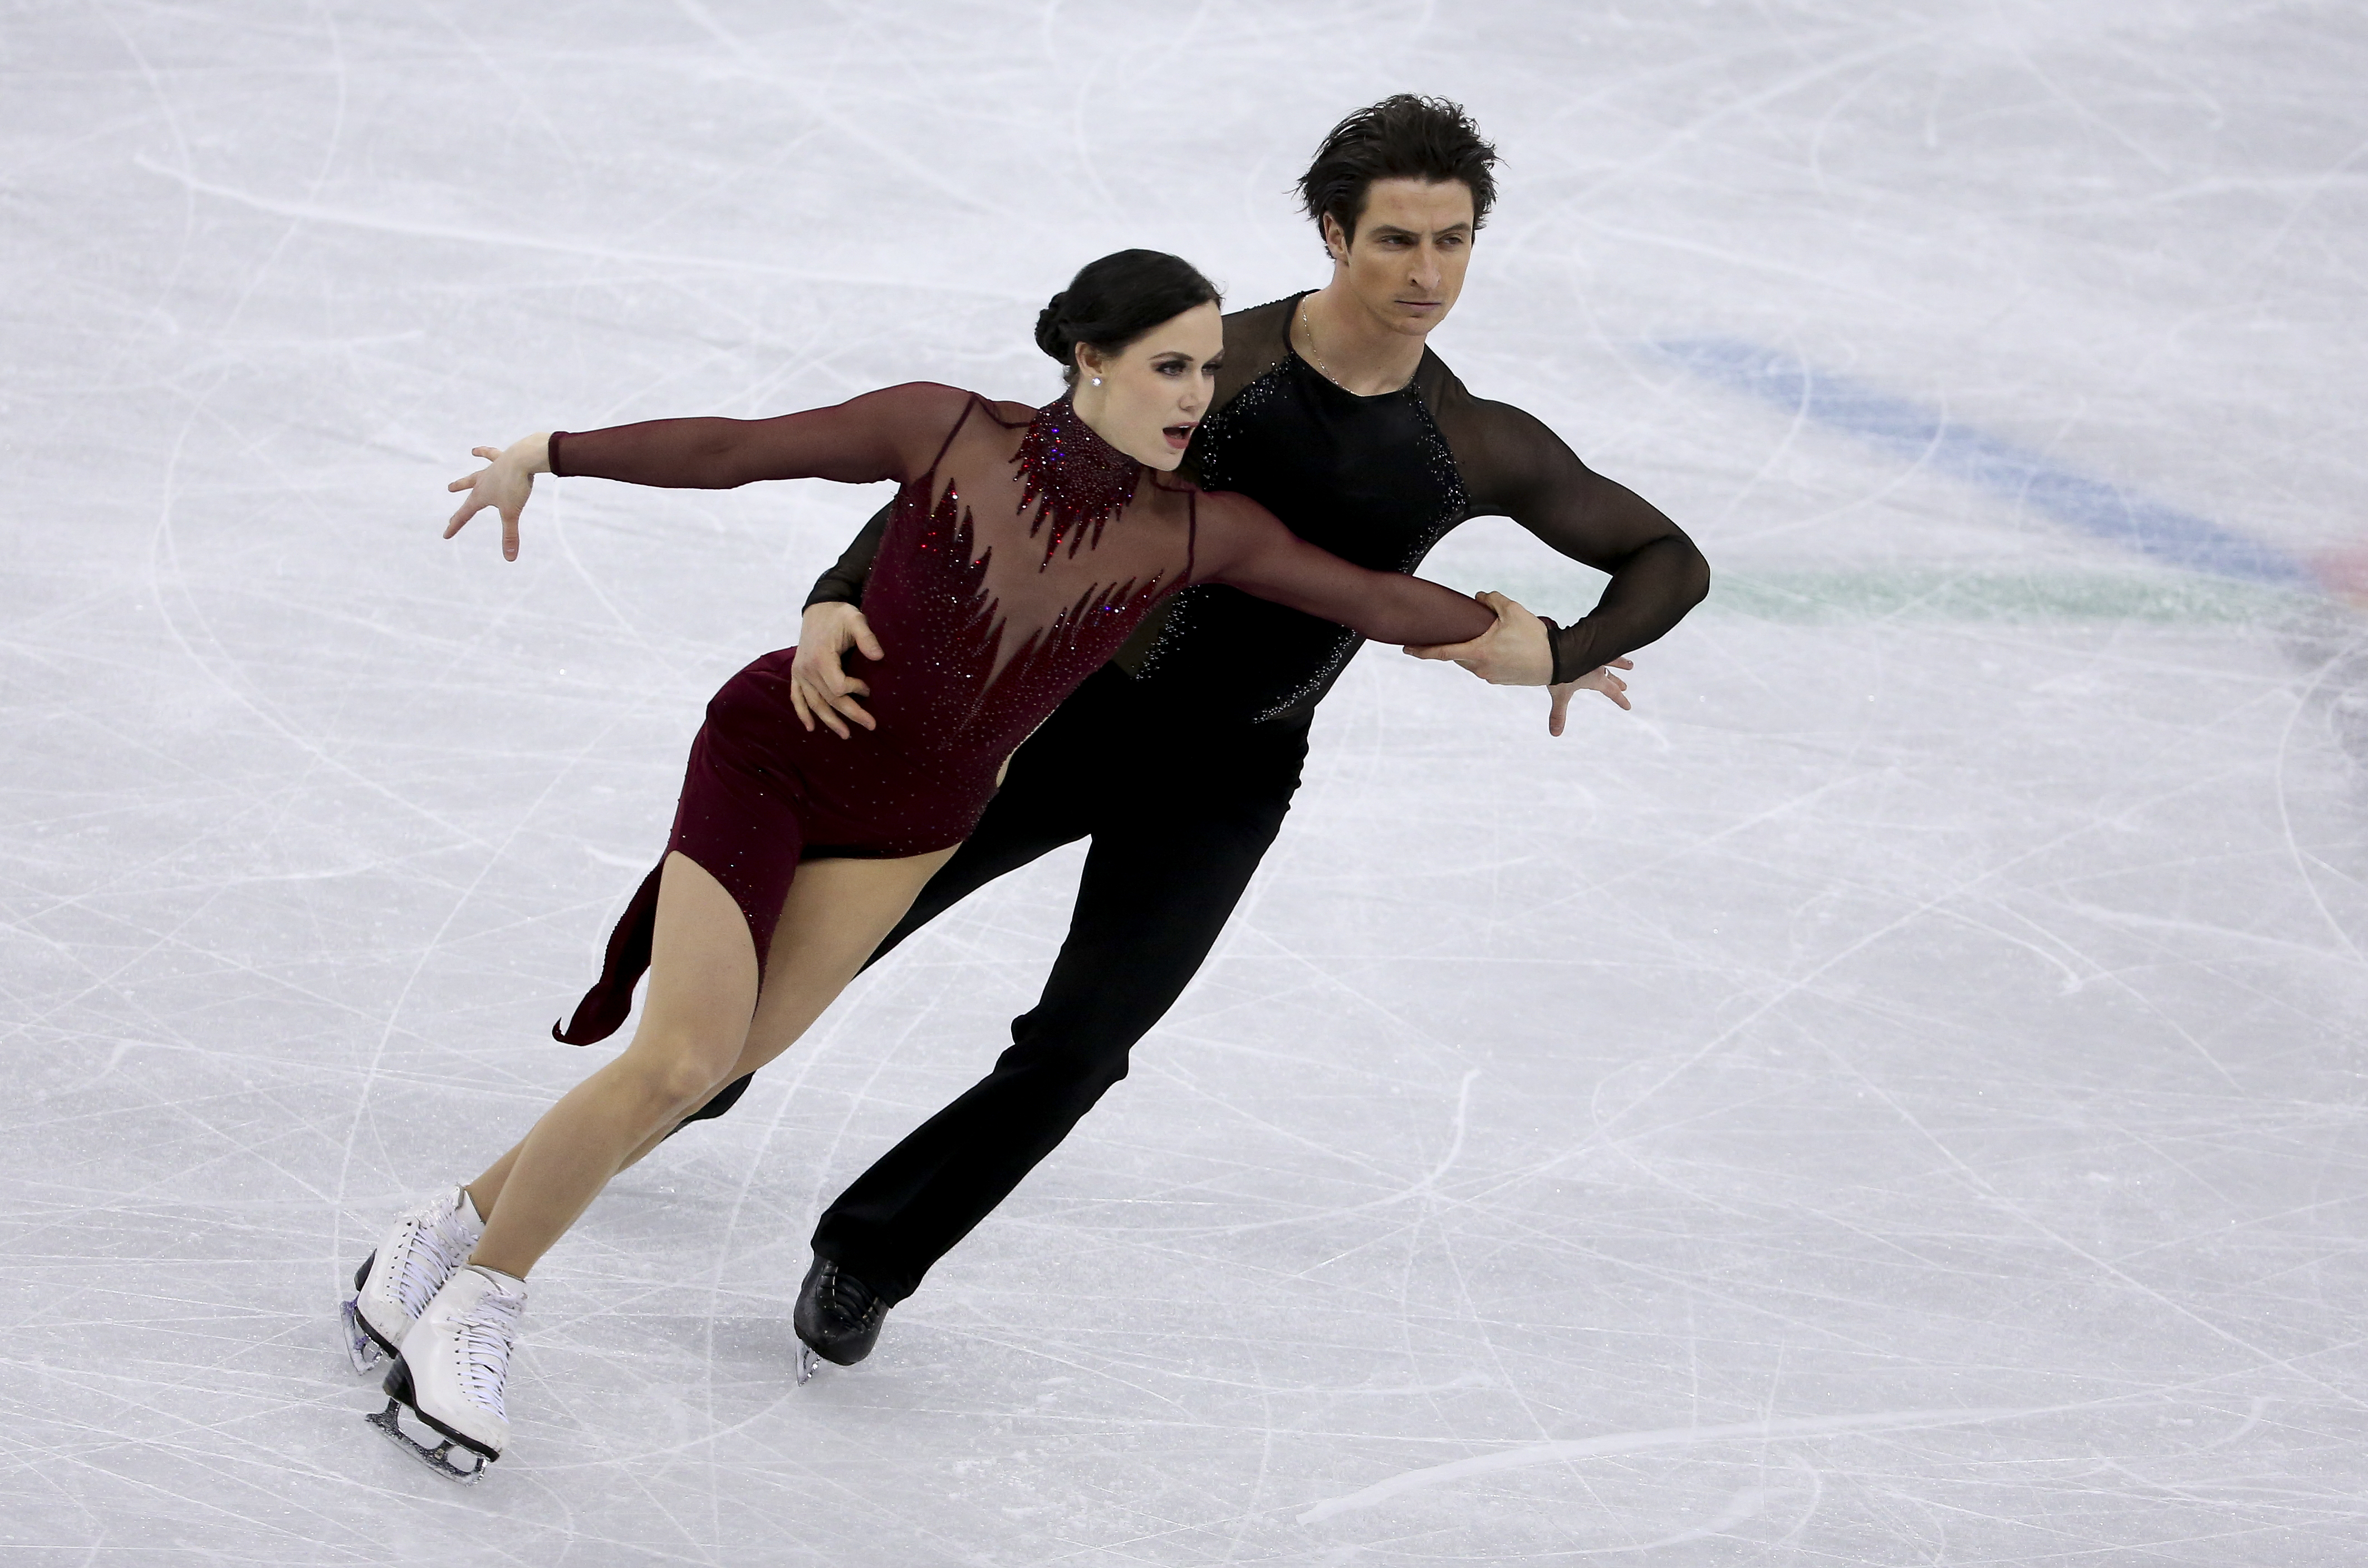 Olympic Ice Dance Skating Hits Emotional Highs and Lows | Time